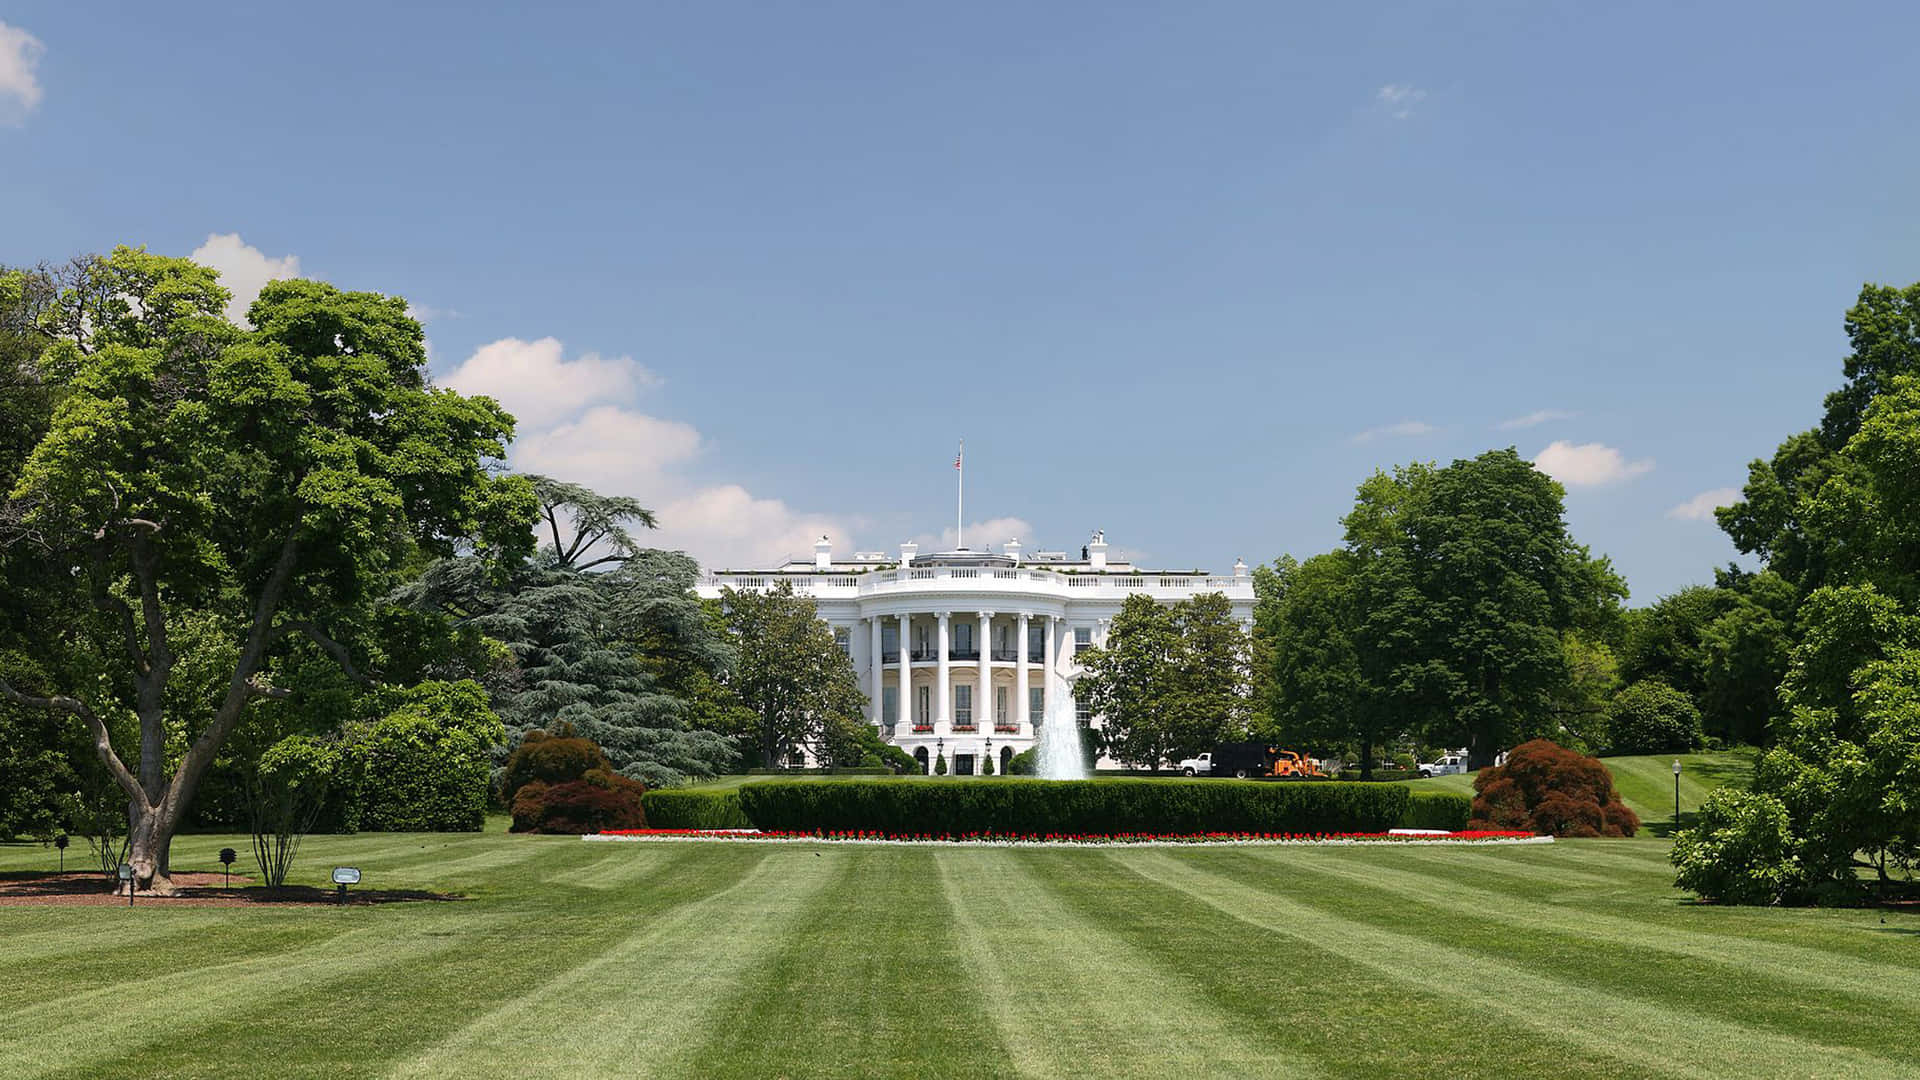 A White House In The Background